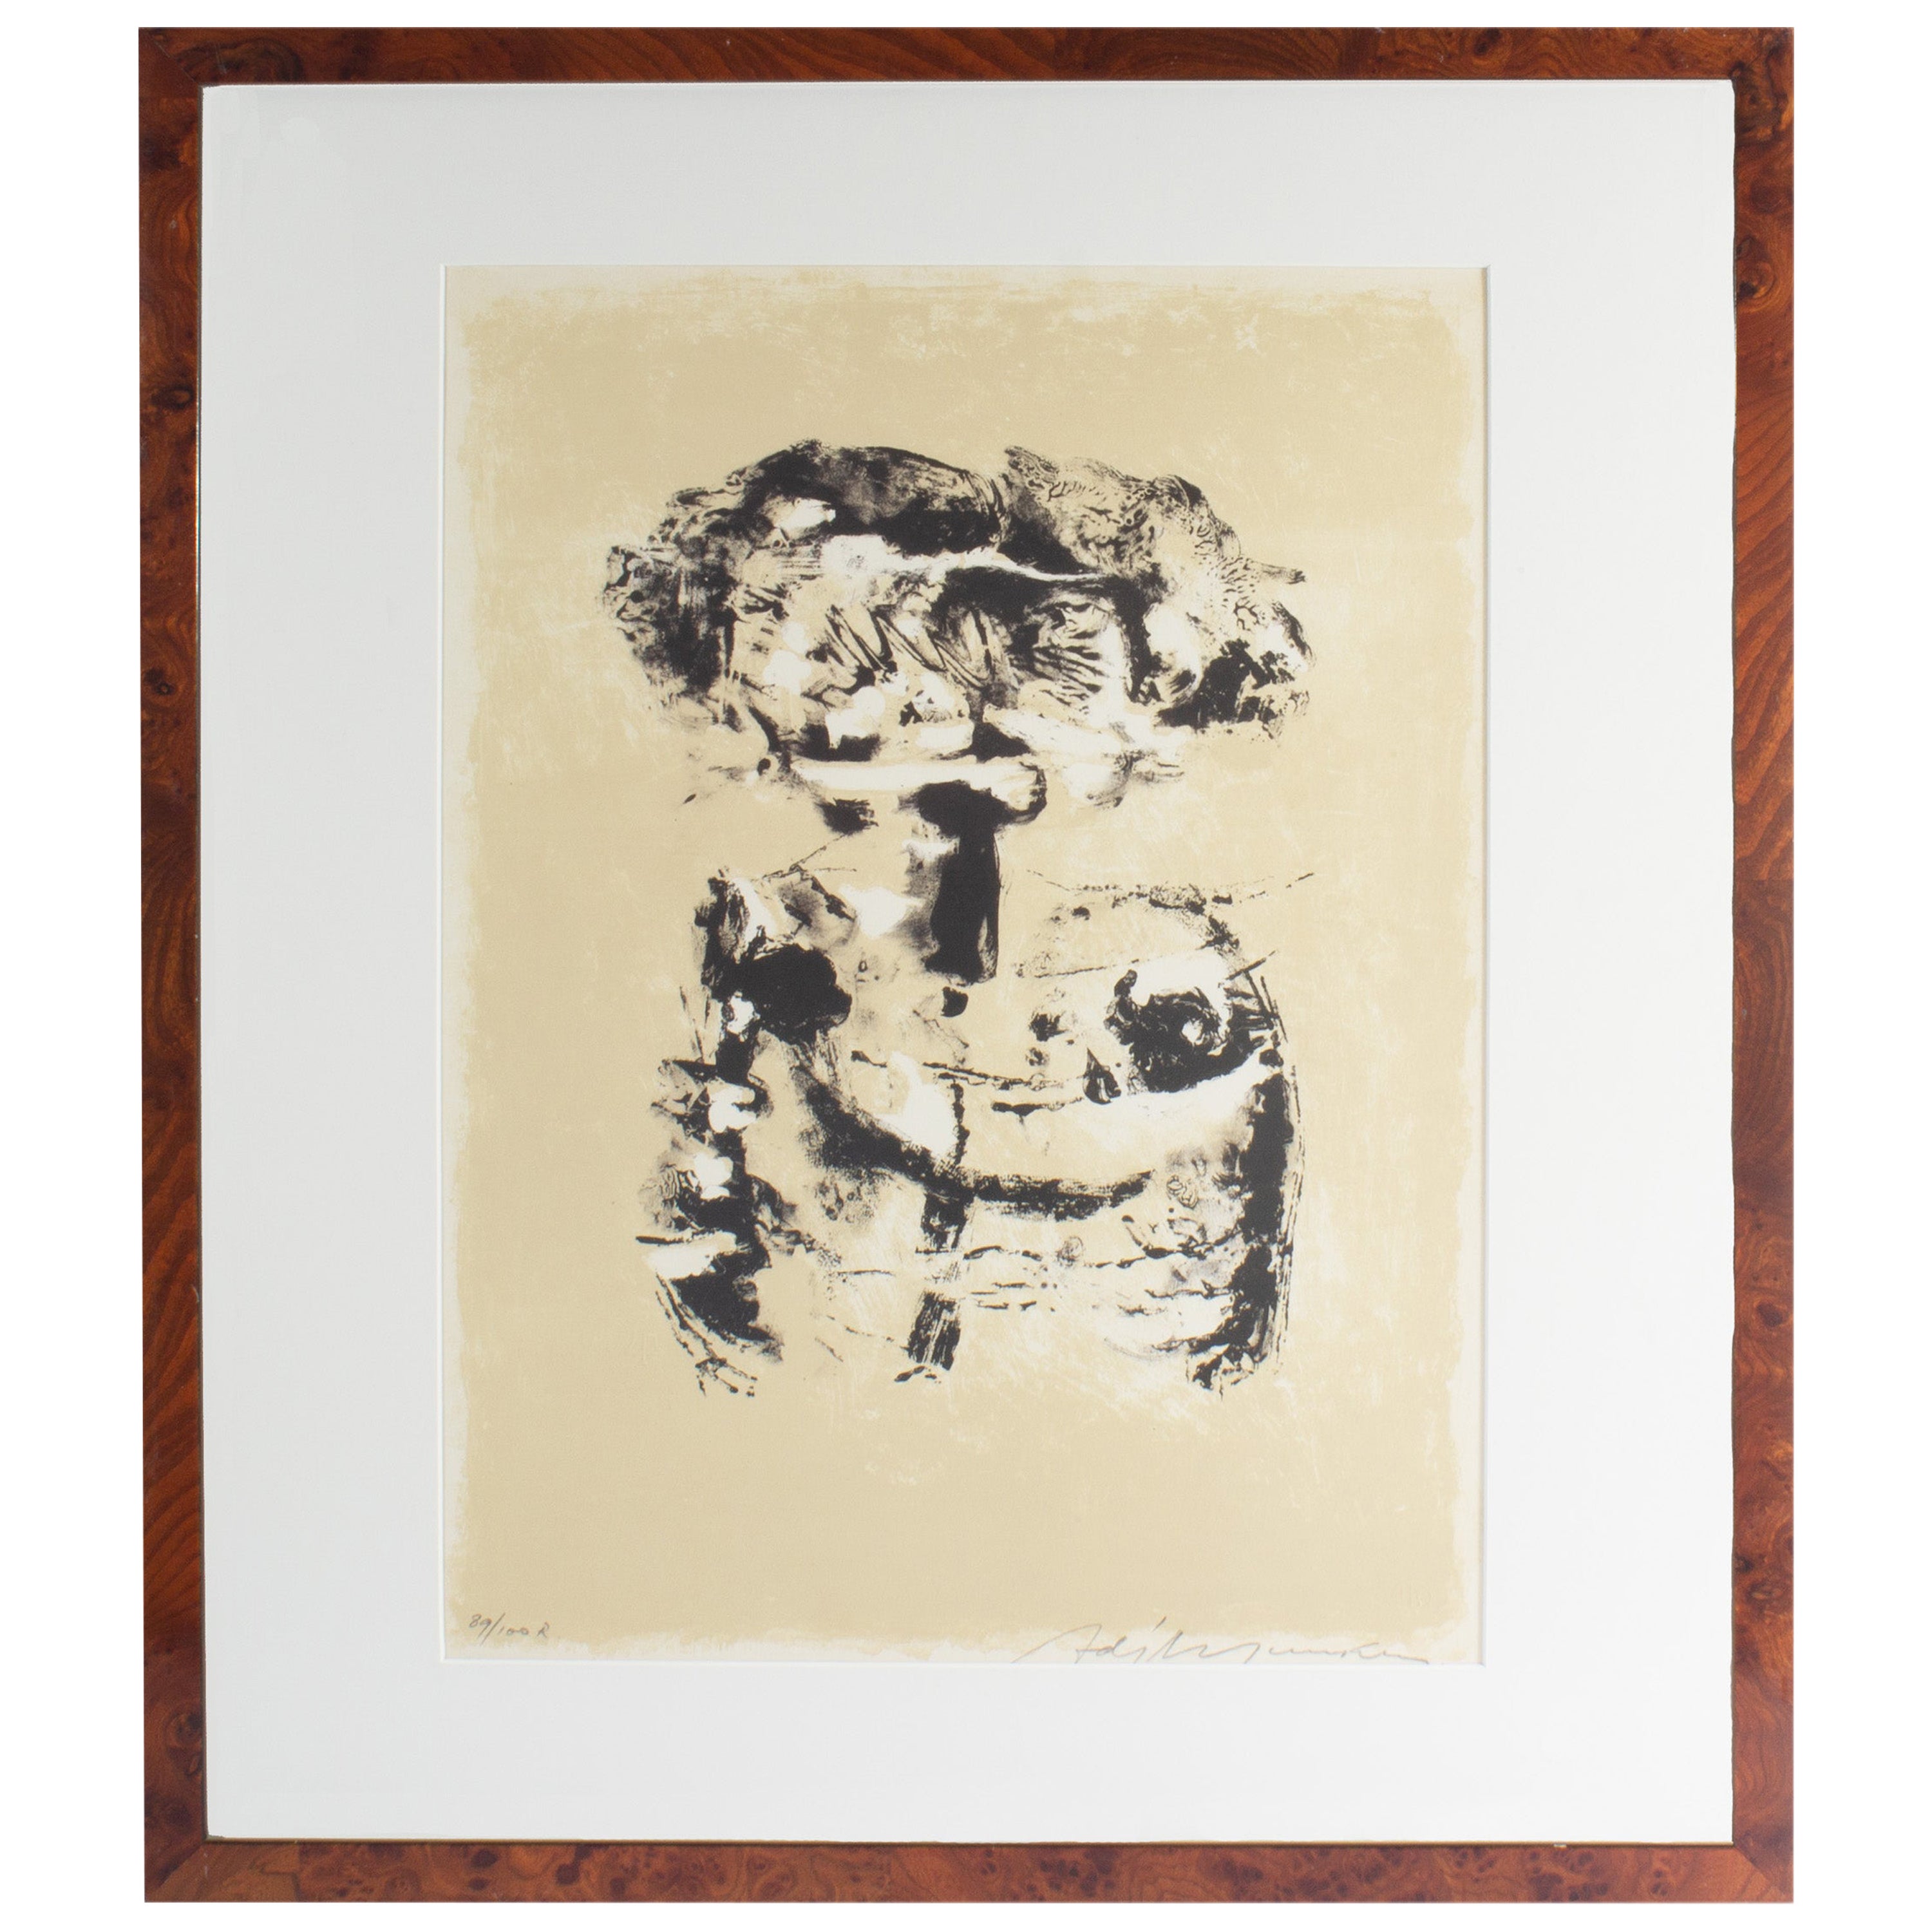 Adja Yunkers Signed 1960s “Salt iv” Limited Edition Abstract Lithograph For Sale